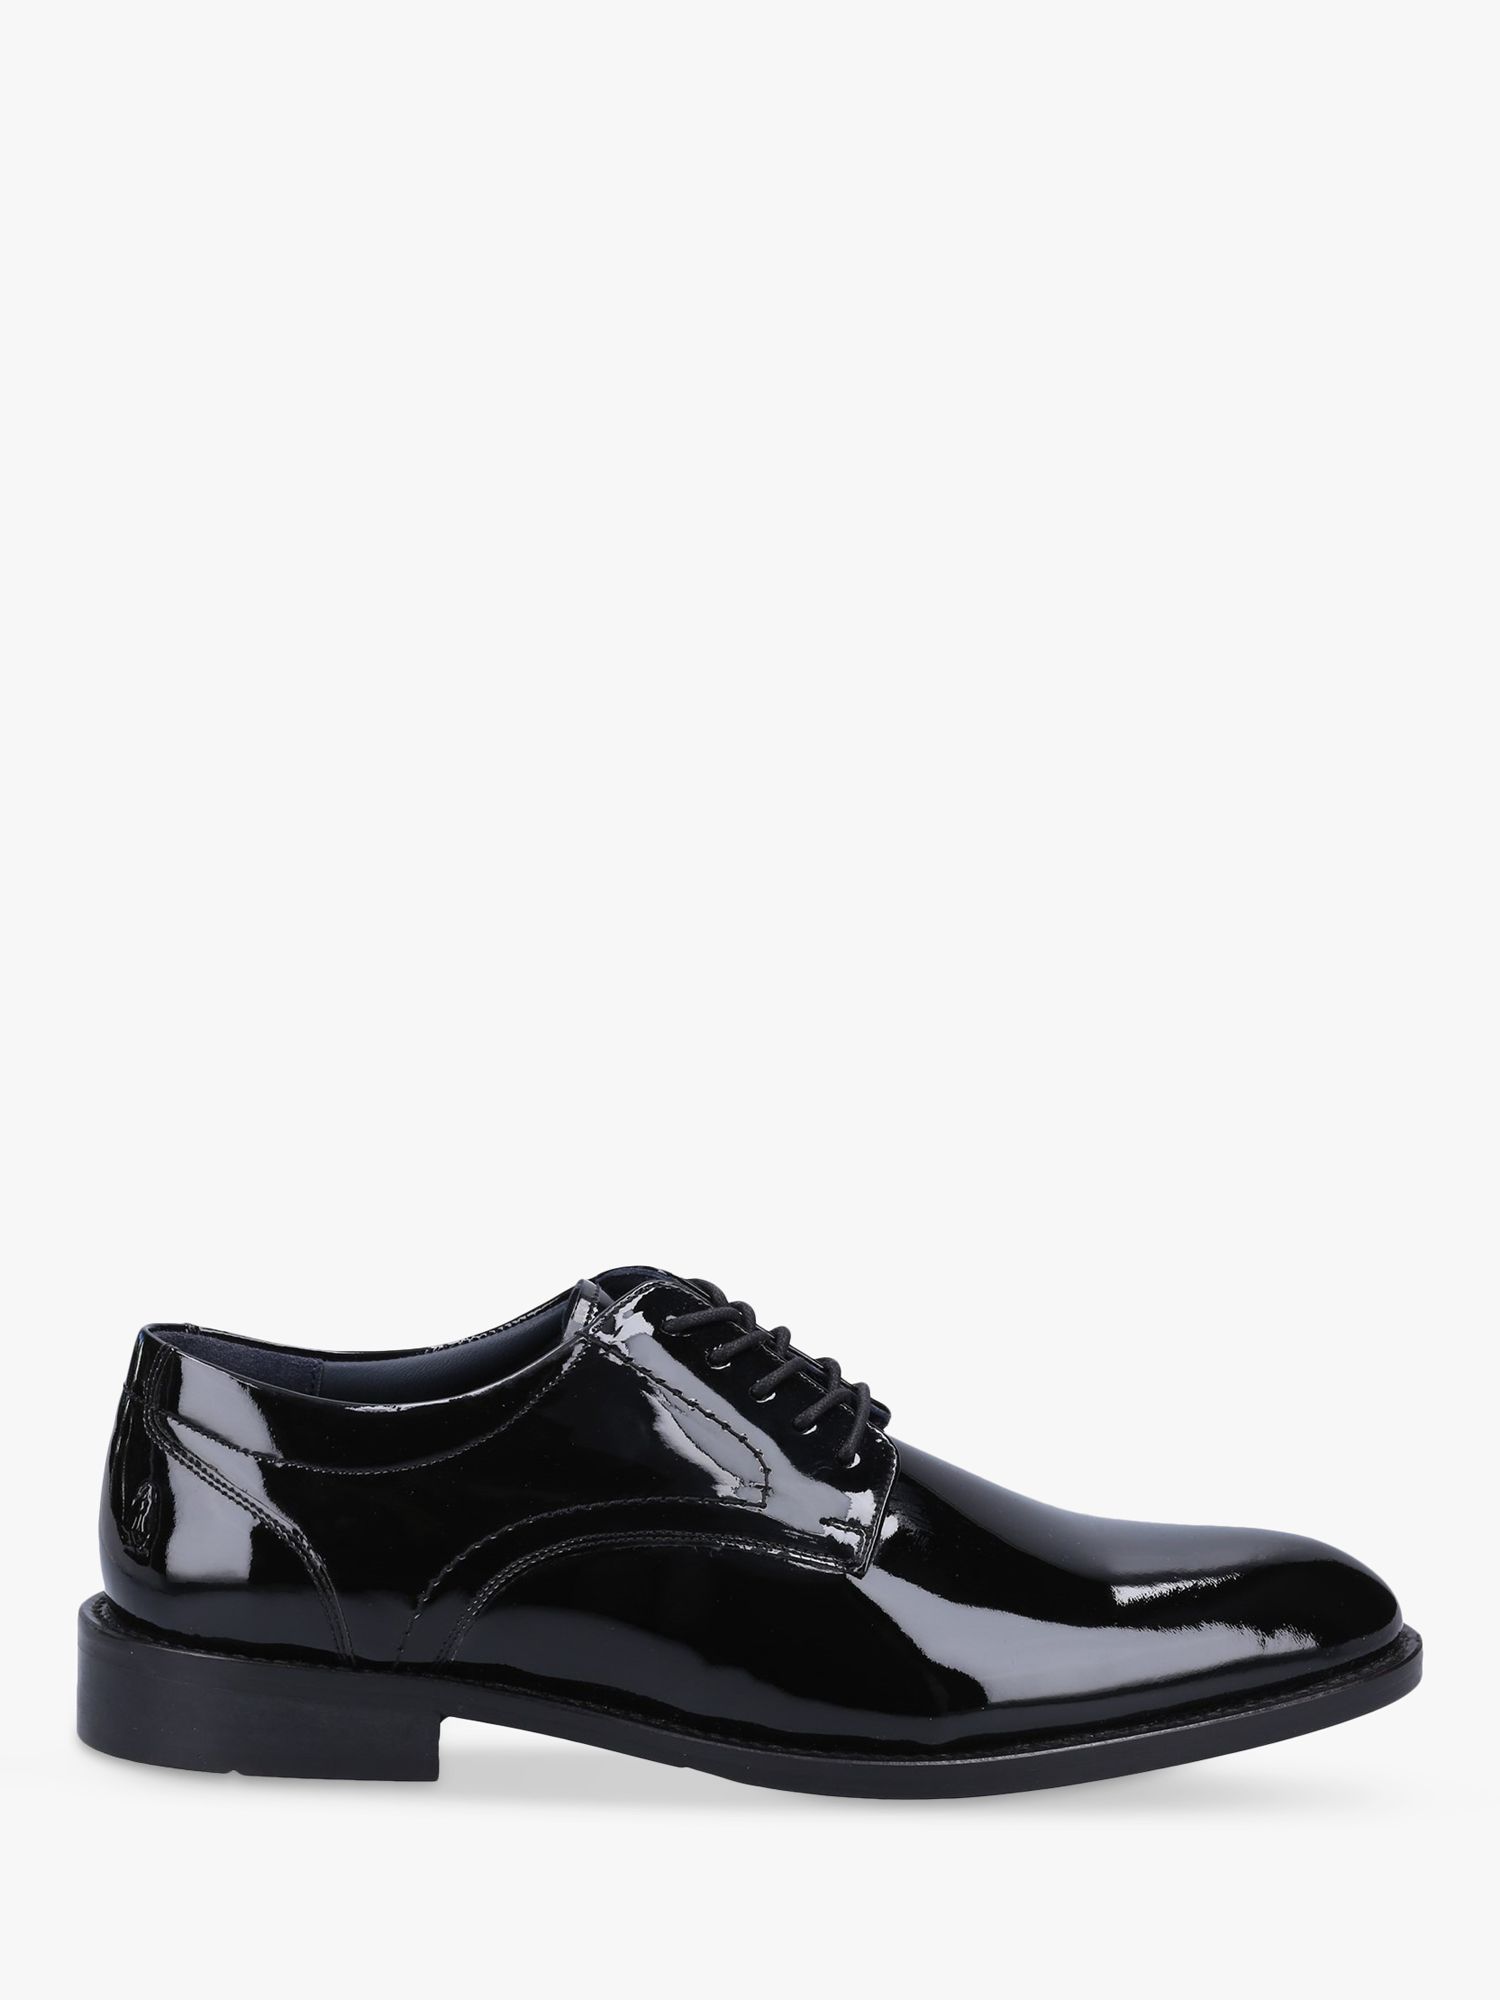 Hush Puppies Damien Patent Leather Lace Up Brogues, Black at John Lewis ...